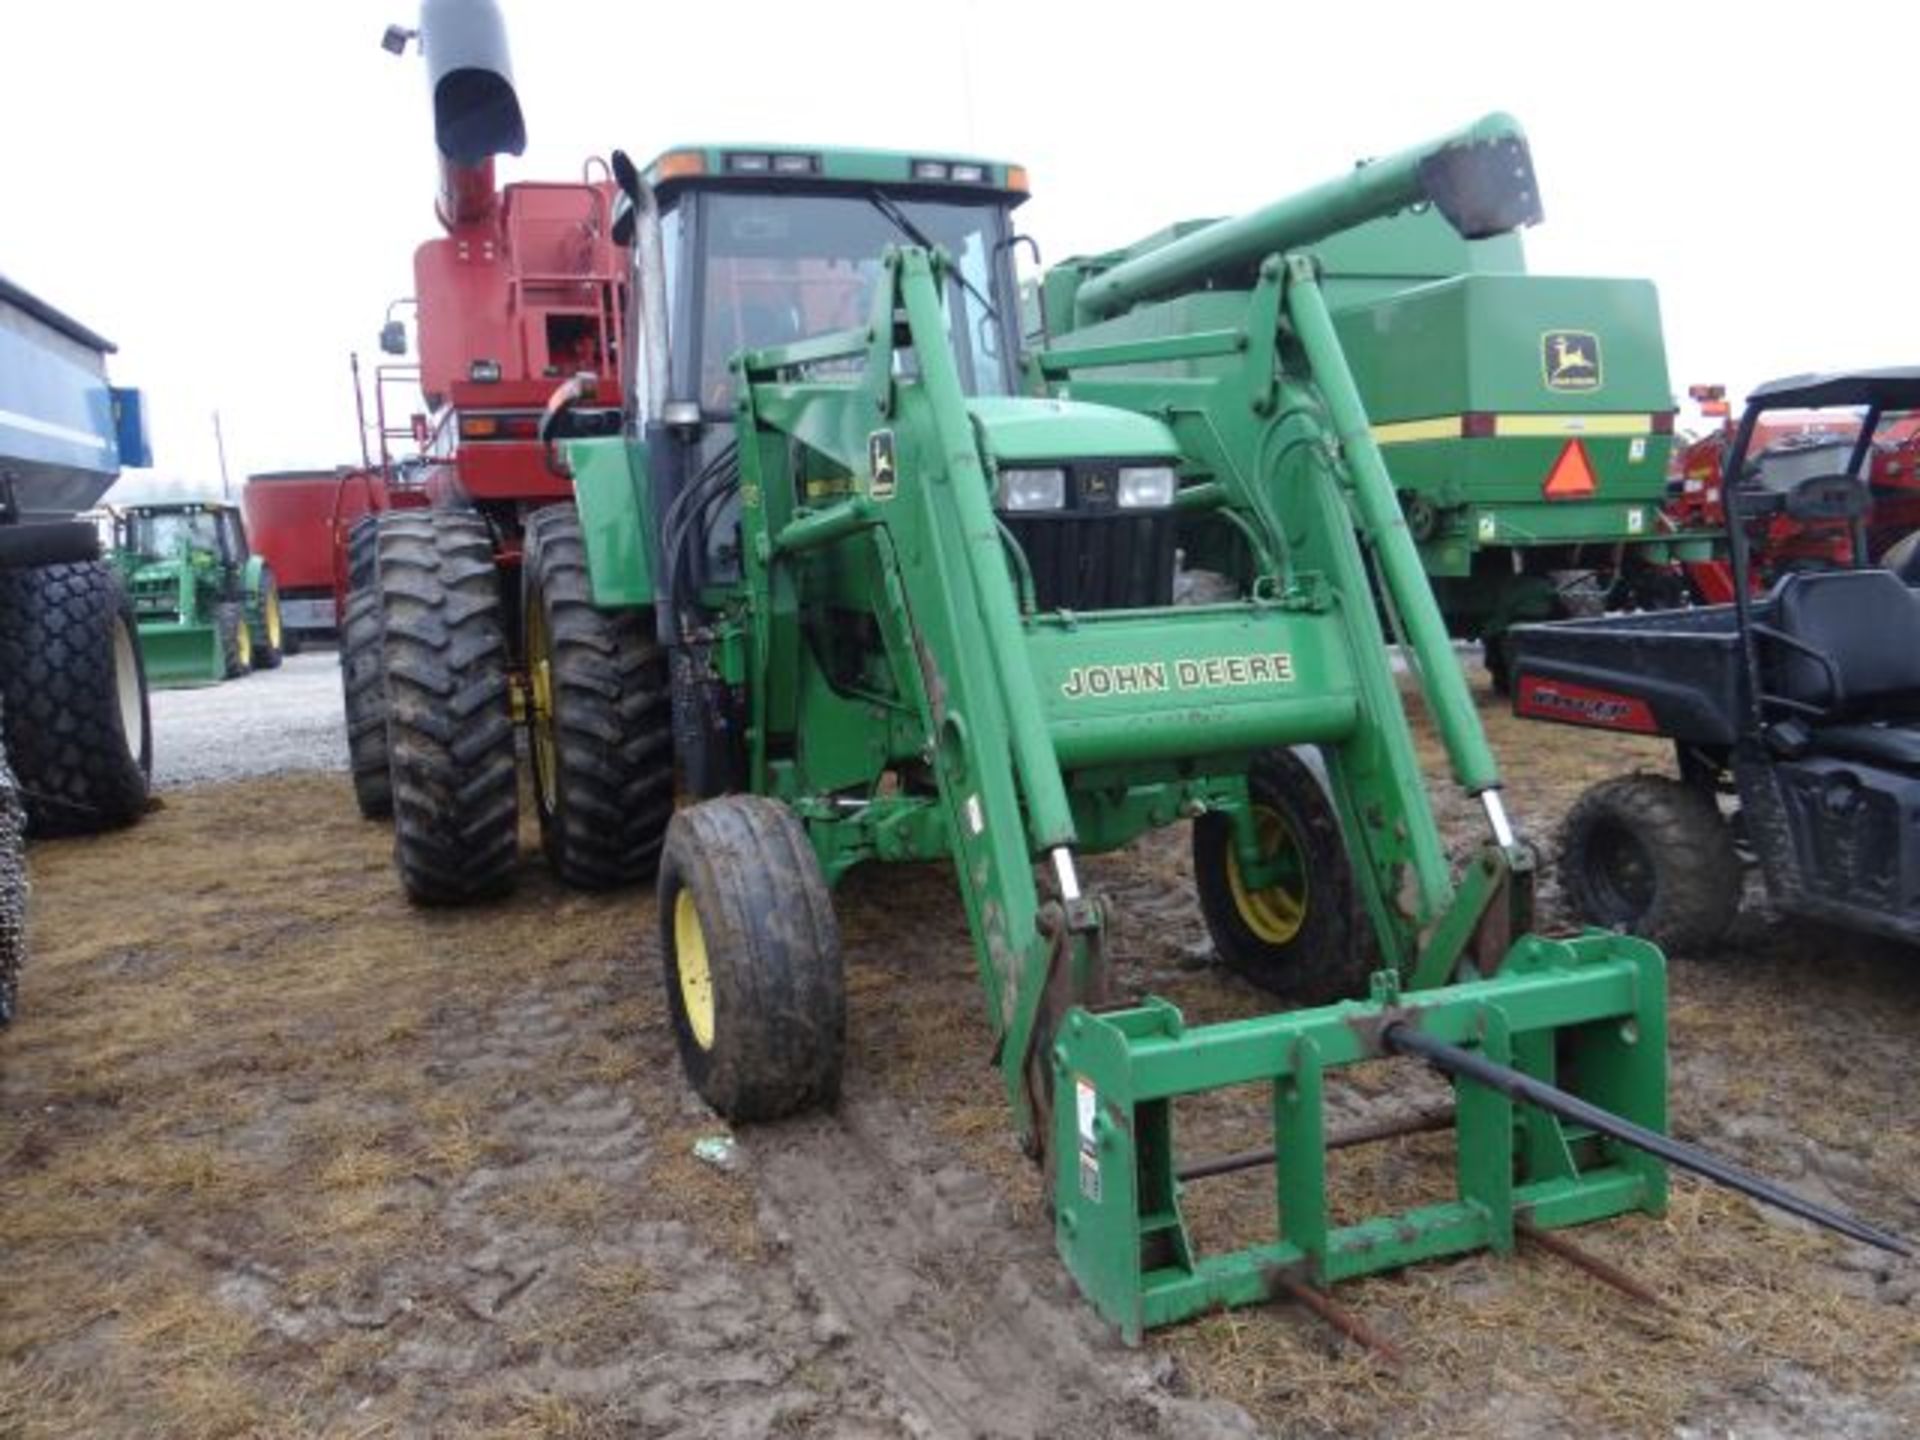 JD 7710 Tractor w/JD 740 Loader, No Bucket Just Bale Spear - Image 2 of 5